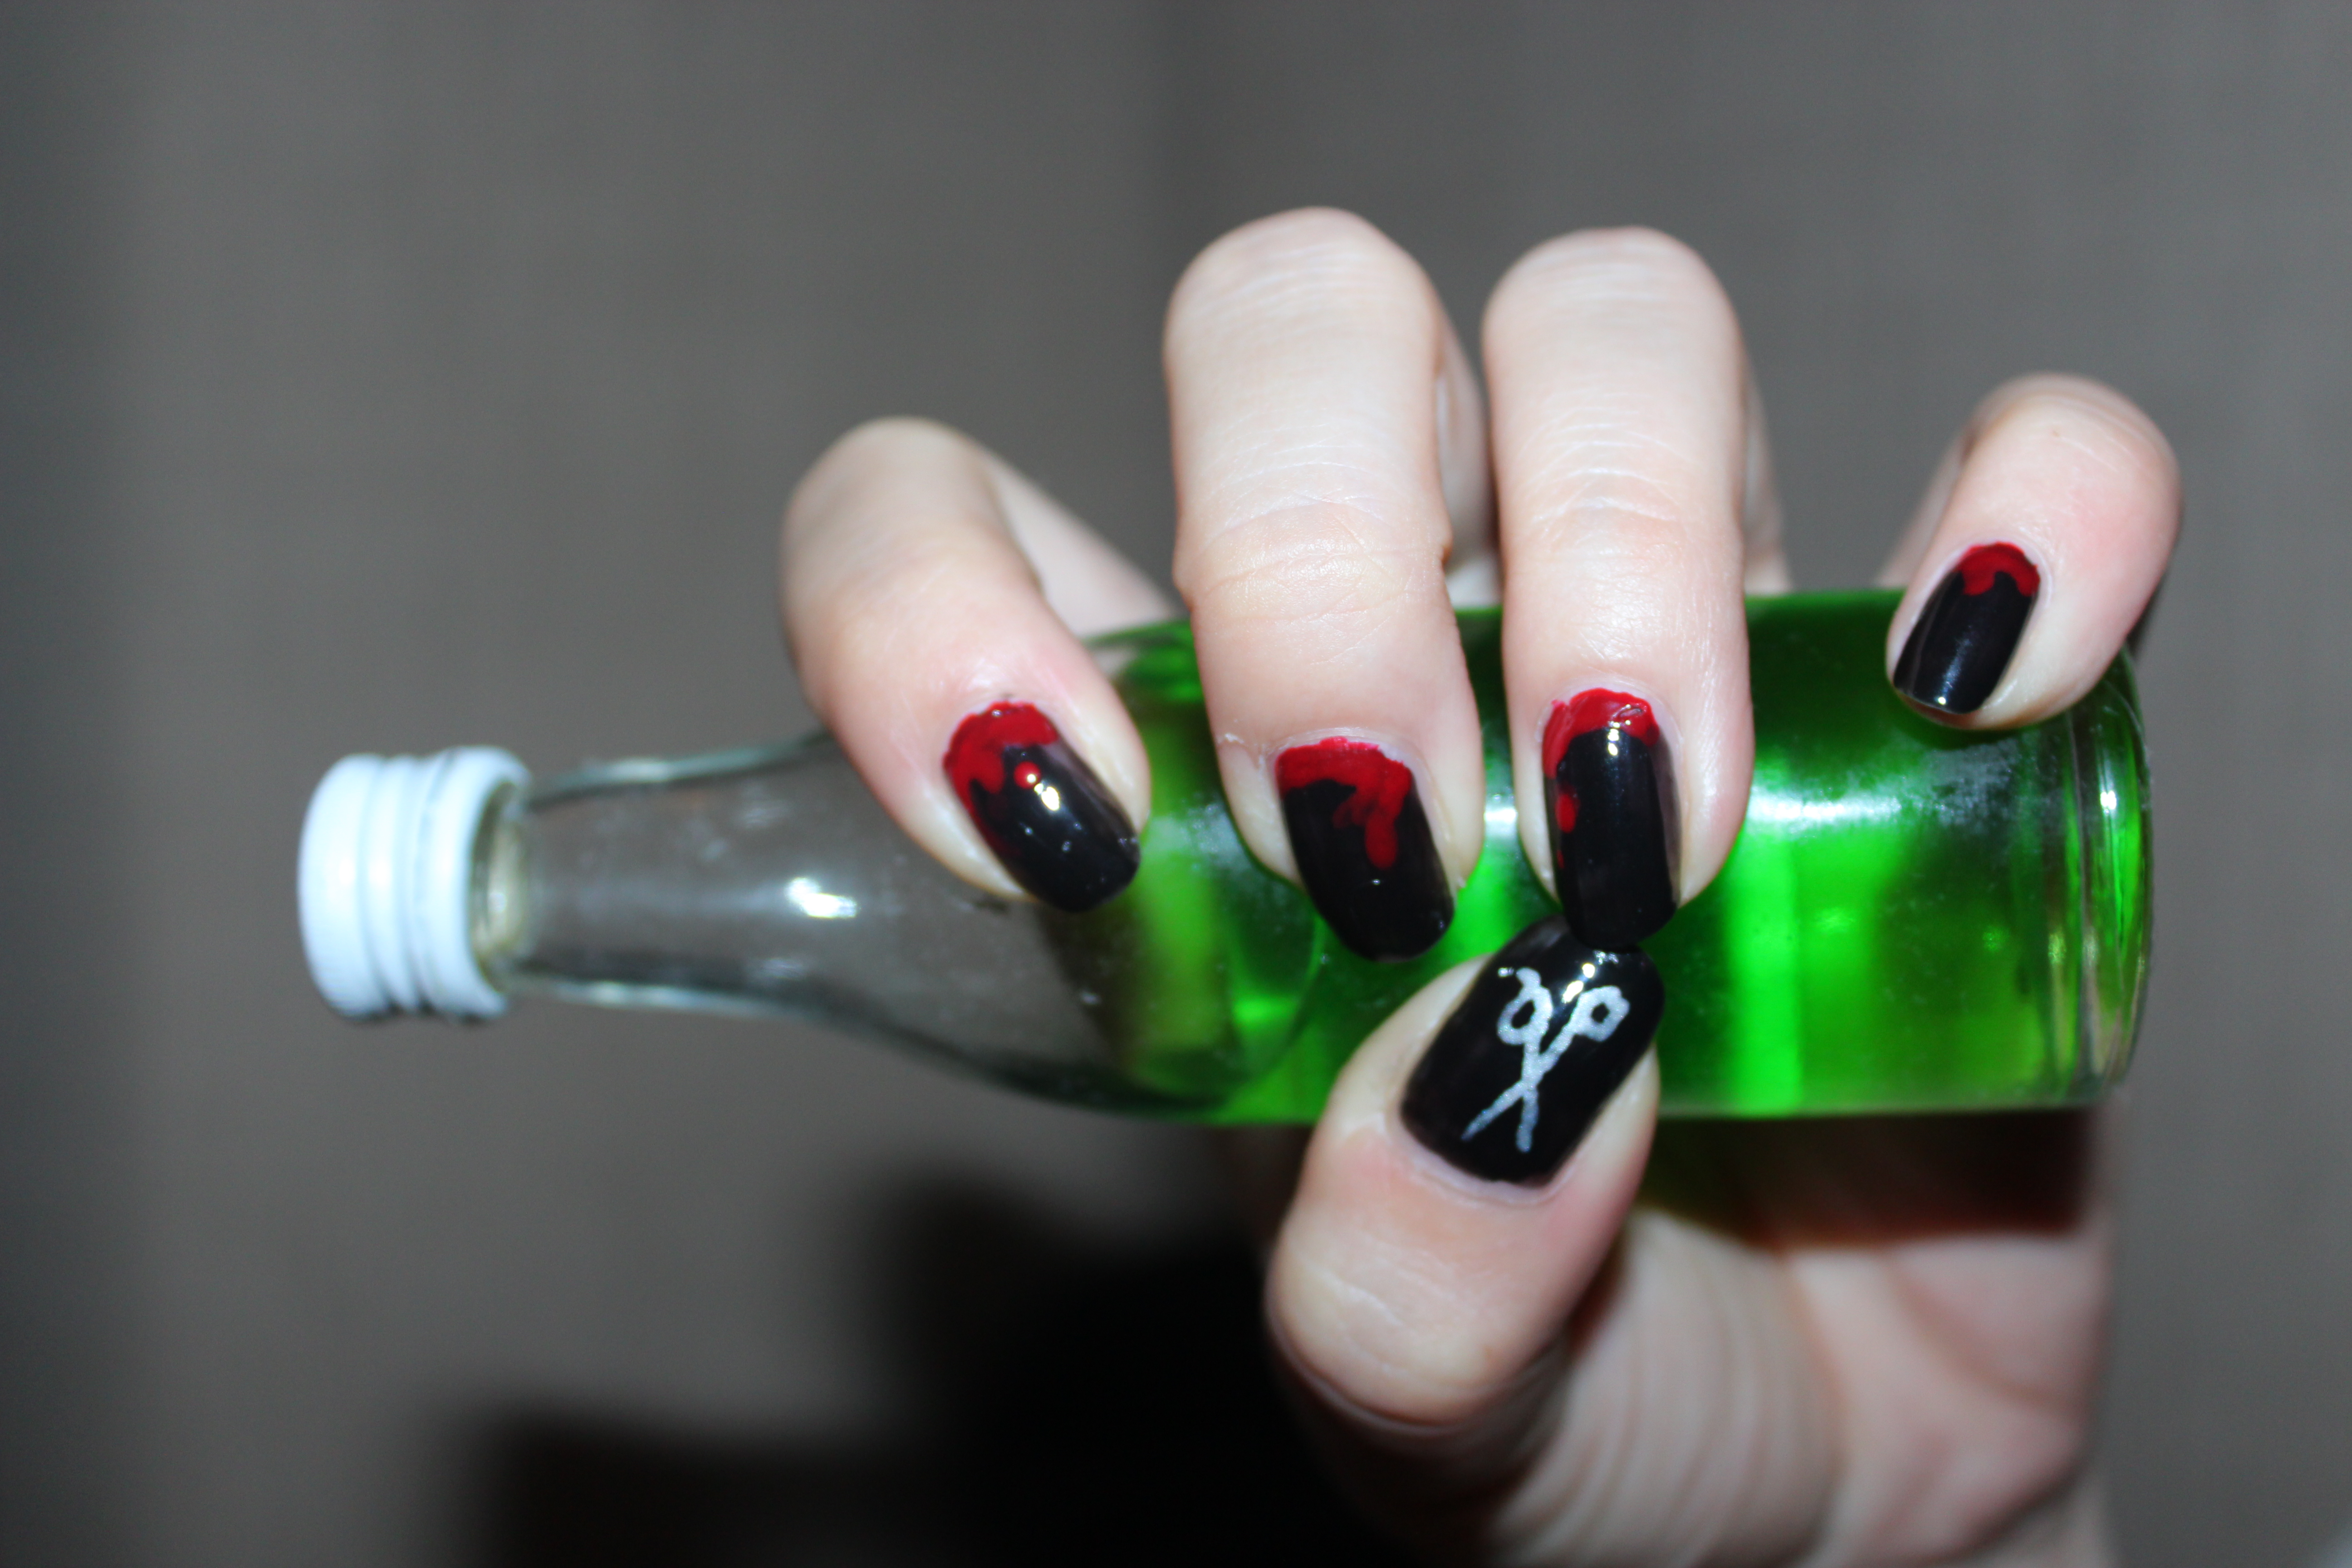 Sweeney Todd nails 4